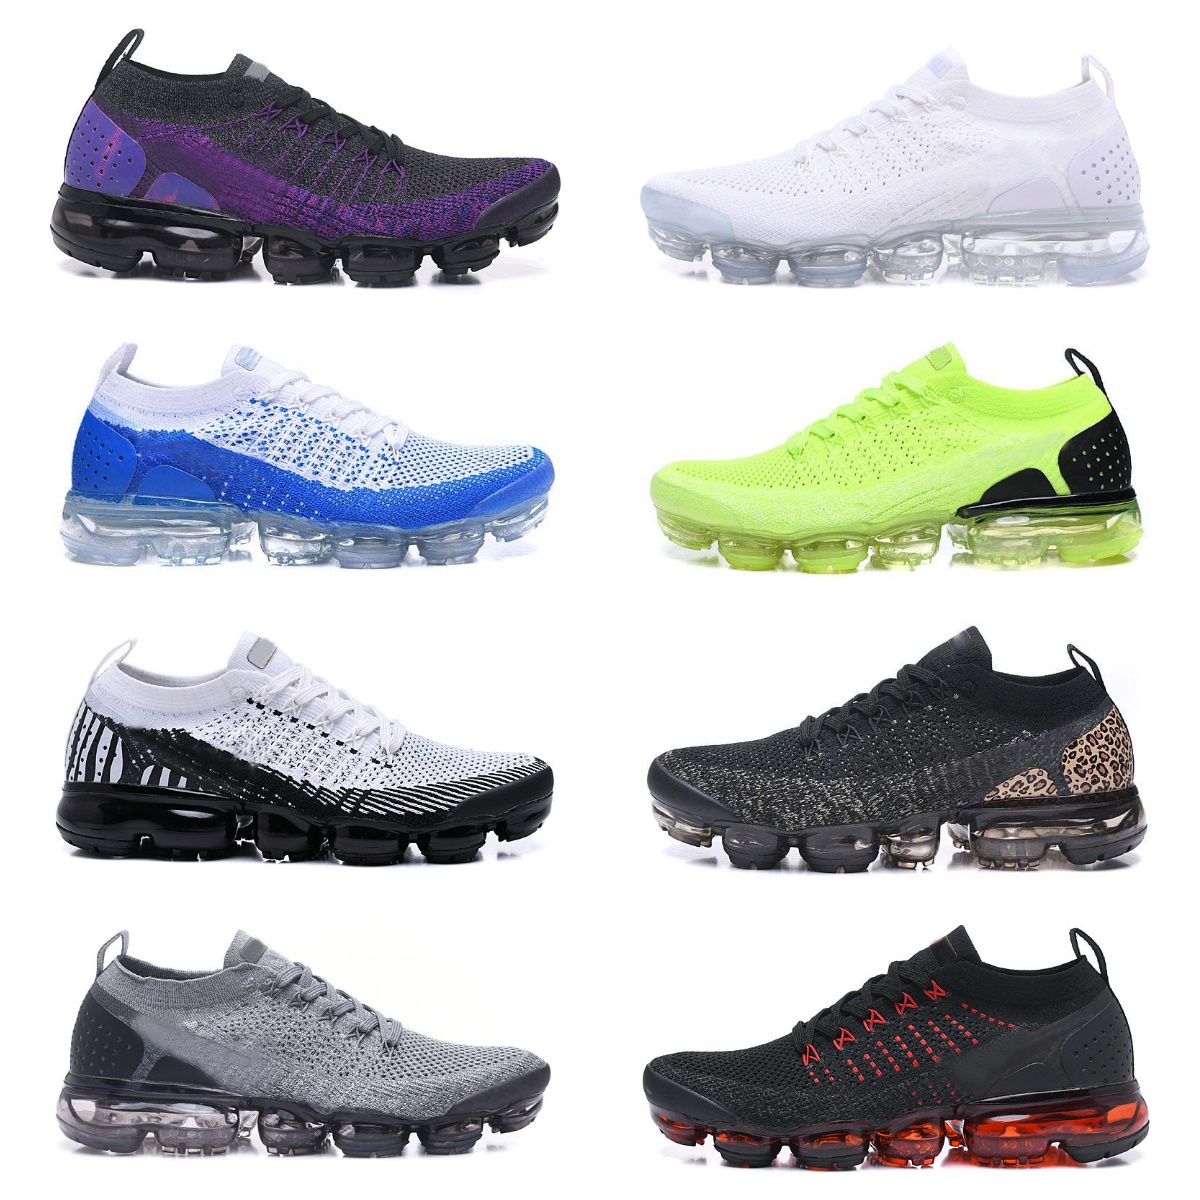 

Vapores Max Fly 2.0 Knit Casual Shoes Classic airs Cushion Triple Black Designer Mens Women White Sail Oreo Midnight Purple Chaussures Sports Trainers Sneakers, Bubble package bag